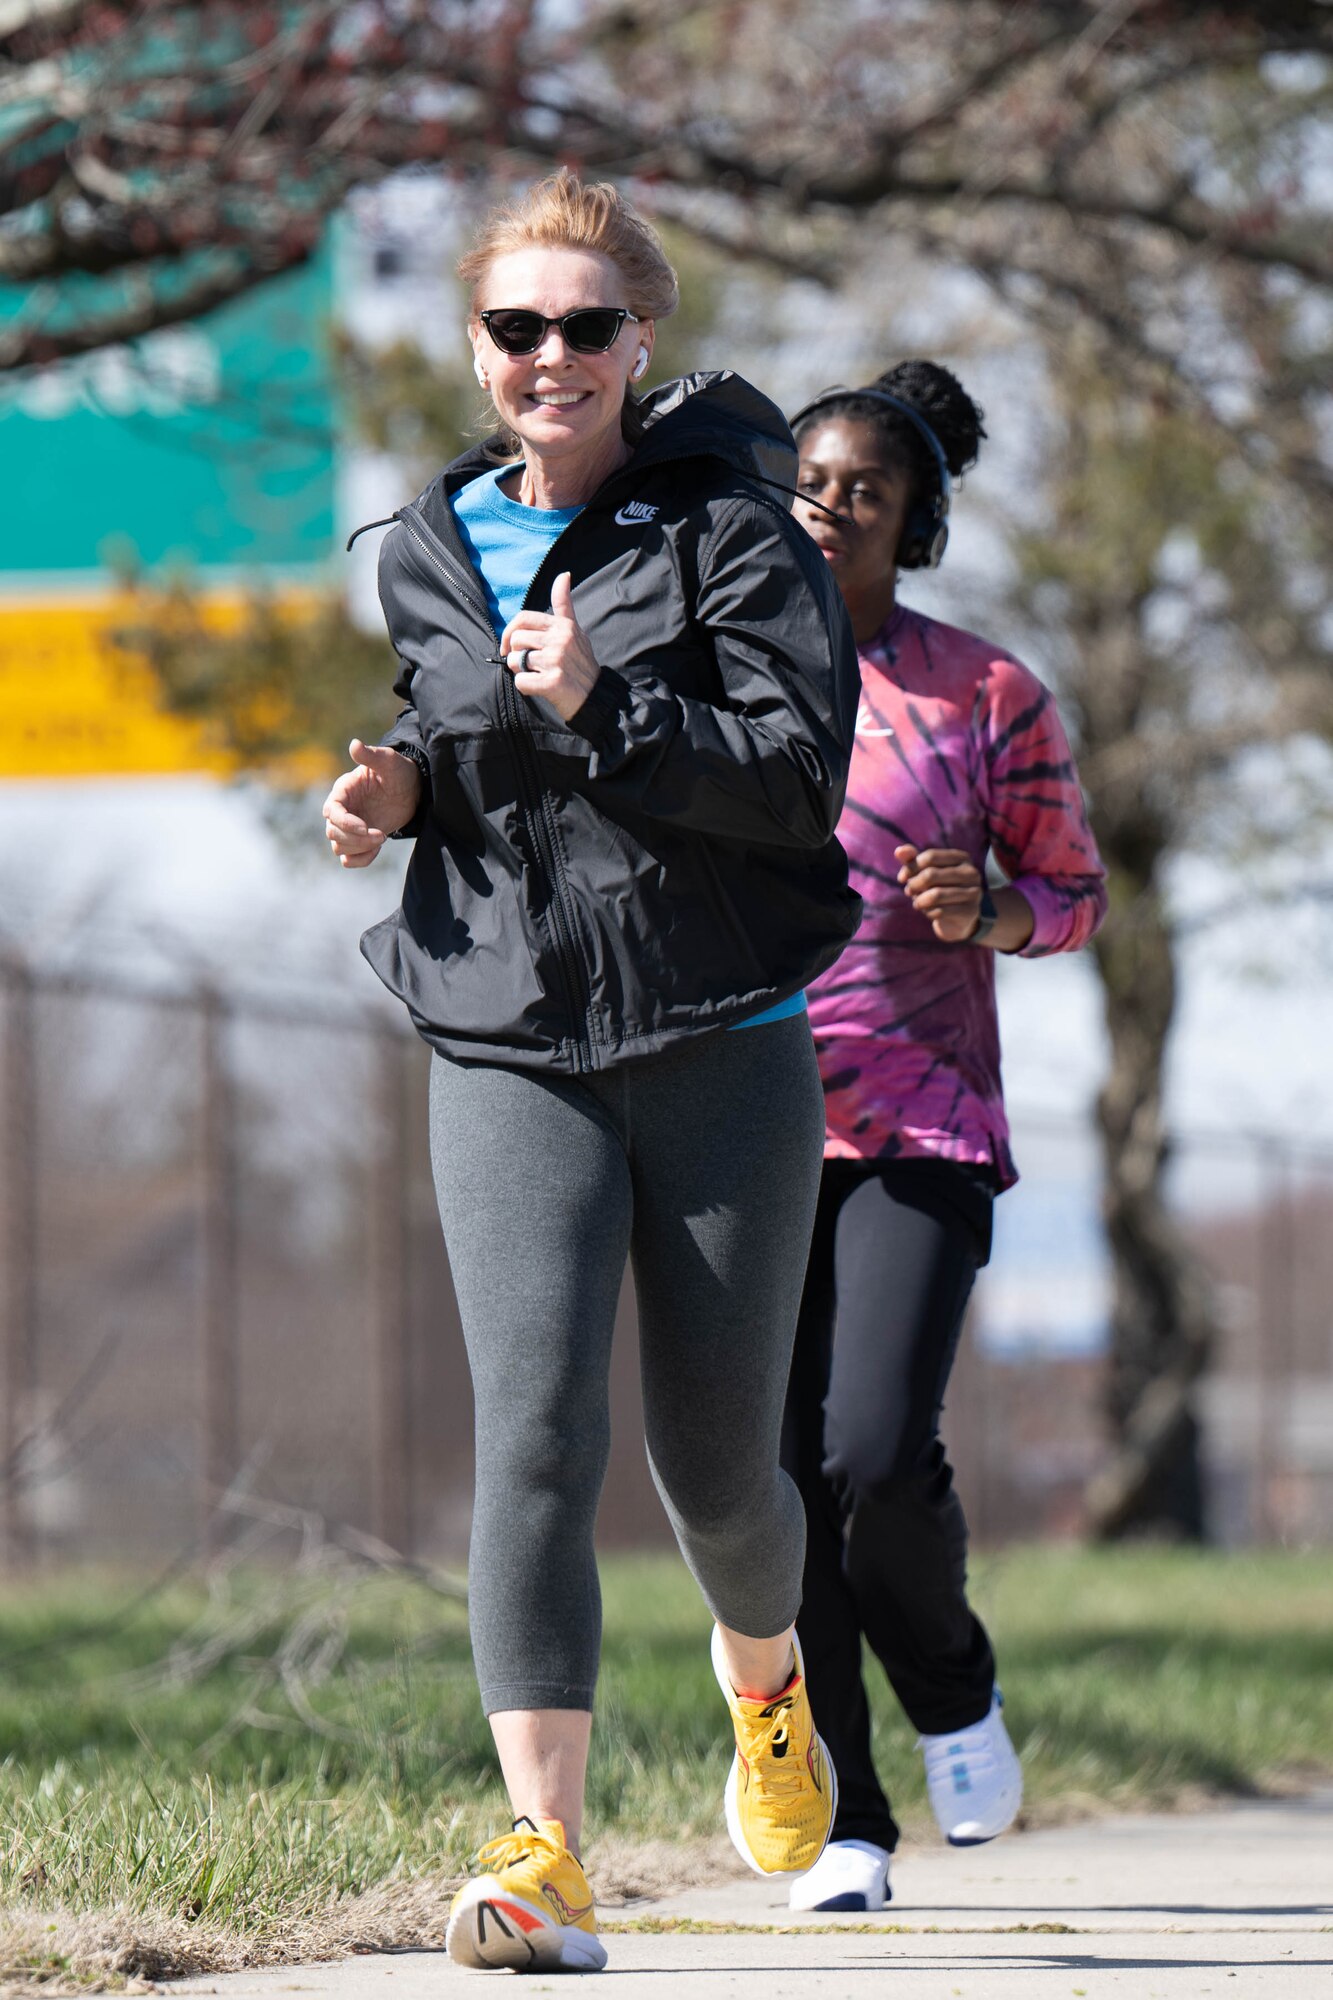 Dover AFB kicks of Women’s History Month observance with 5K run